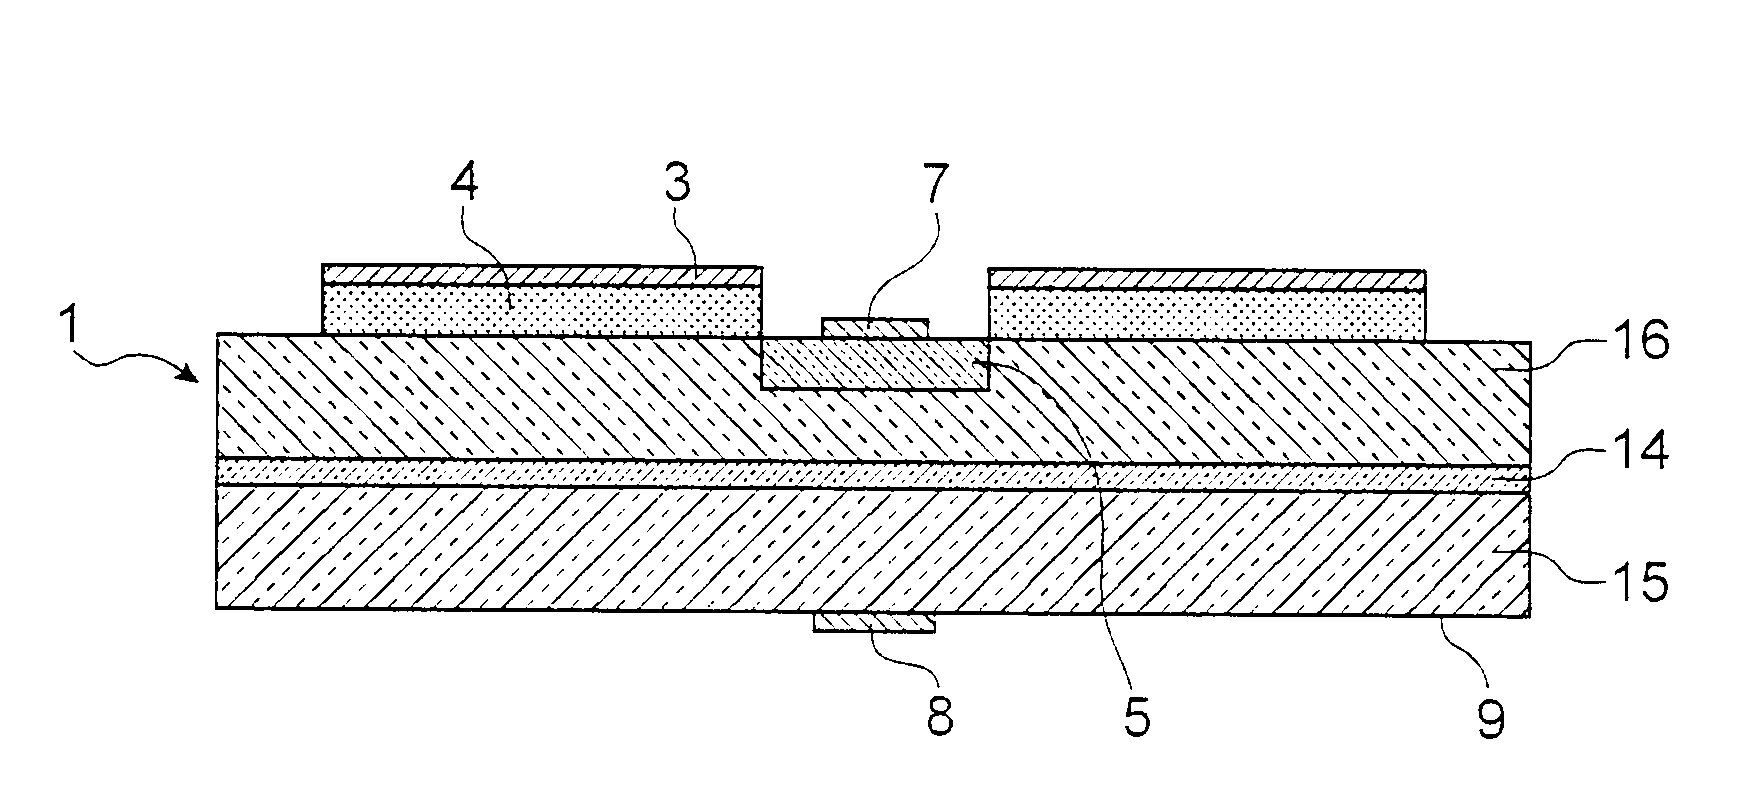 Light-emitting diode in semiconductor material and its fabrication method